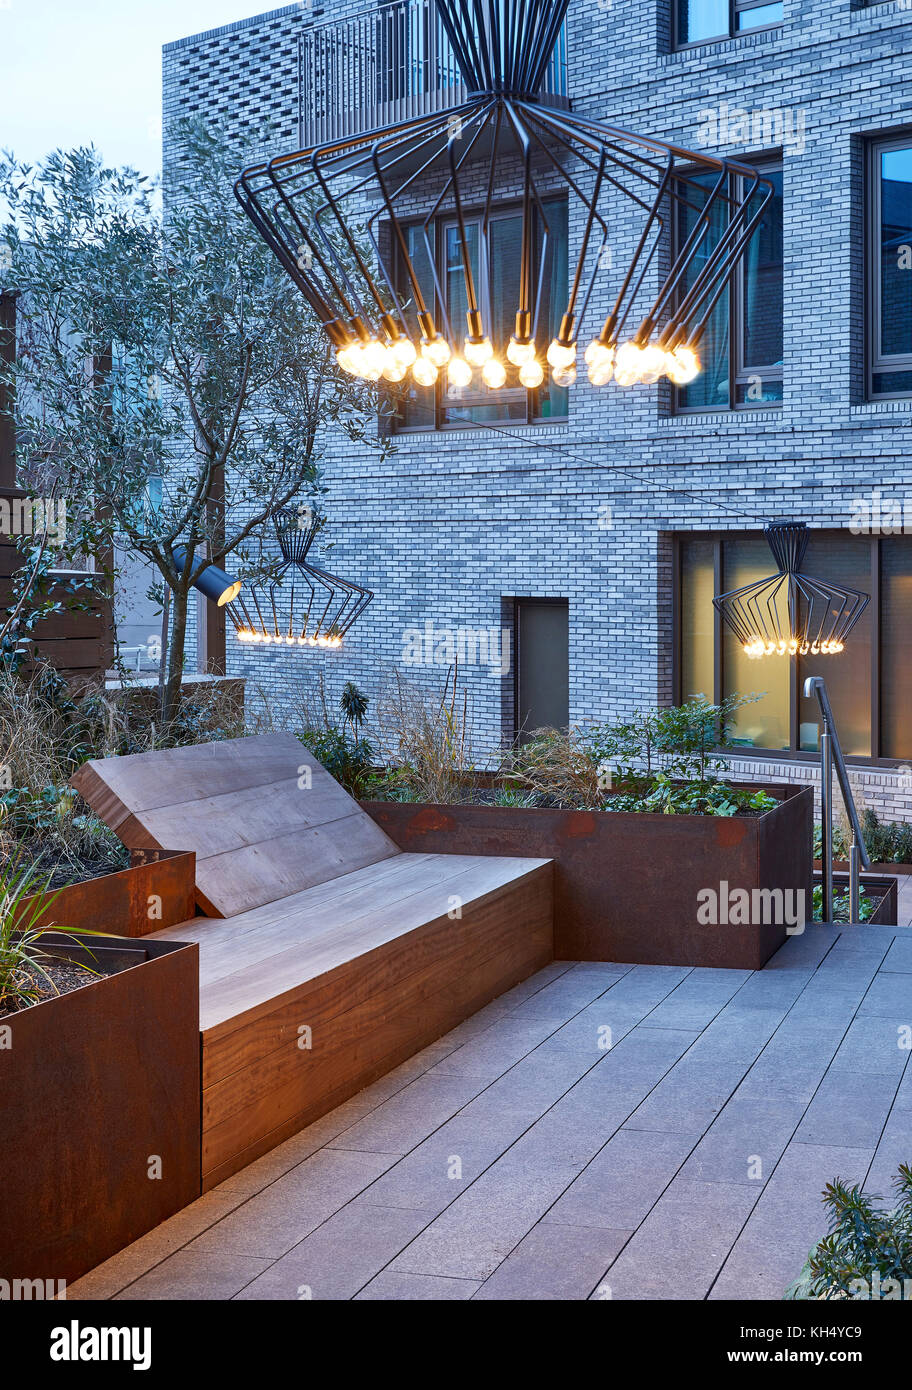 Landscaped garden with outdoor lighting features, raised metal garden beds and wooden seating. 55 Victoria Street, London, United Kingdom. Architect: Stock Photo